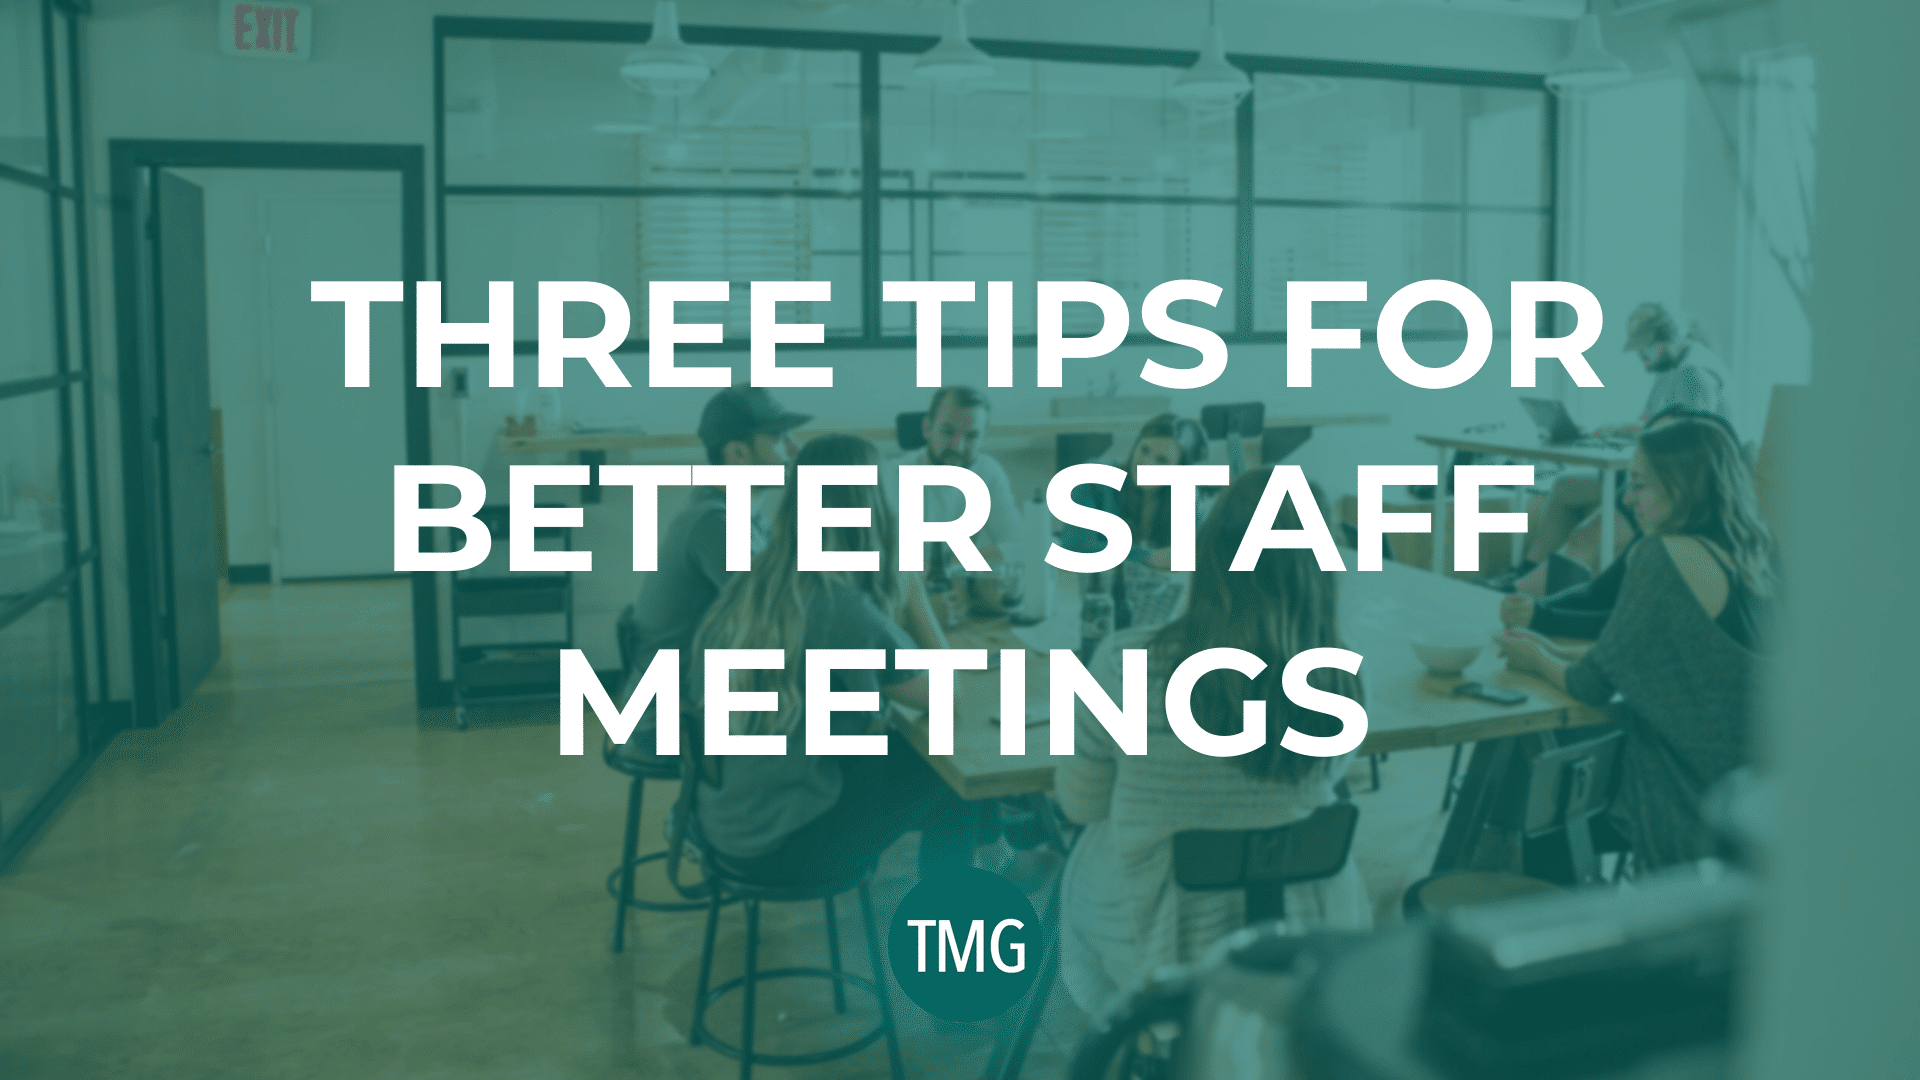 three-tips-for-better-staff-meetings-at-your-church-header-image-the-church-revitalization-podcast